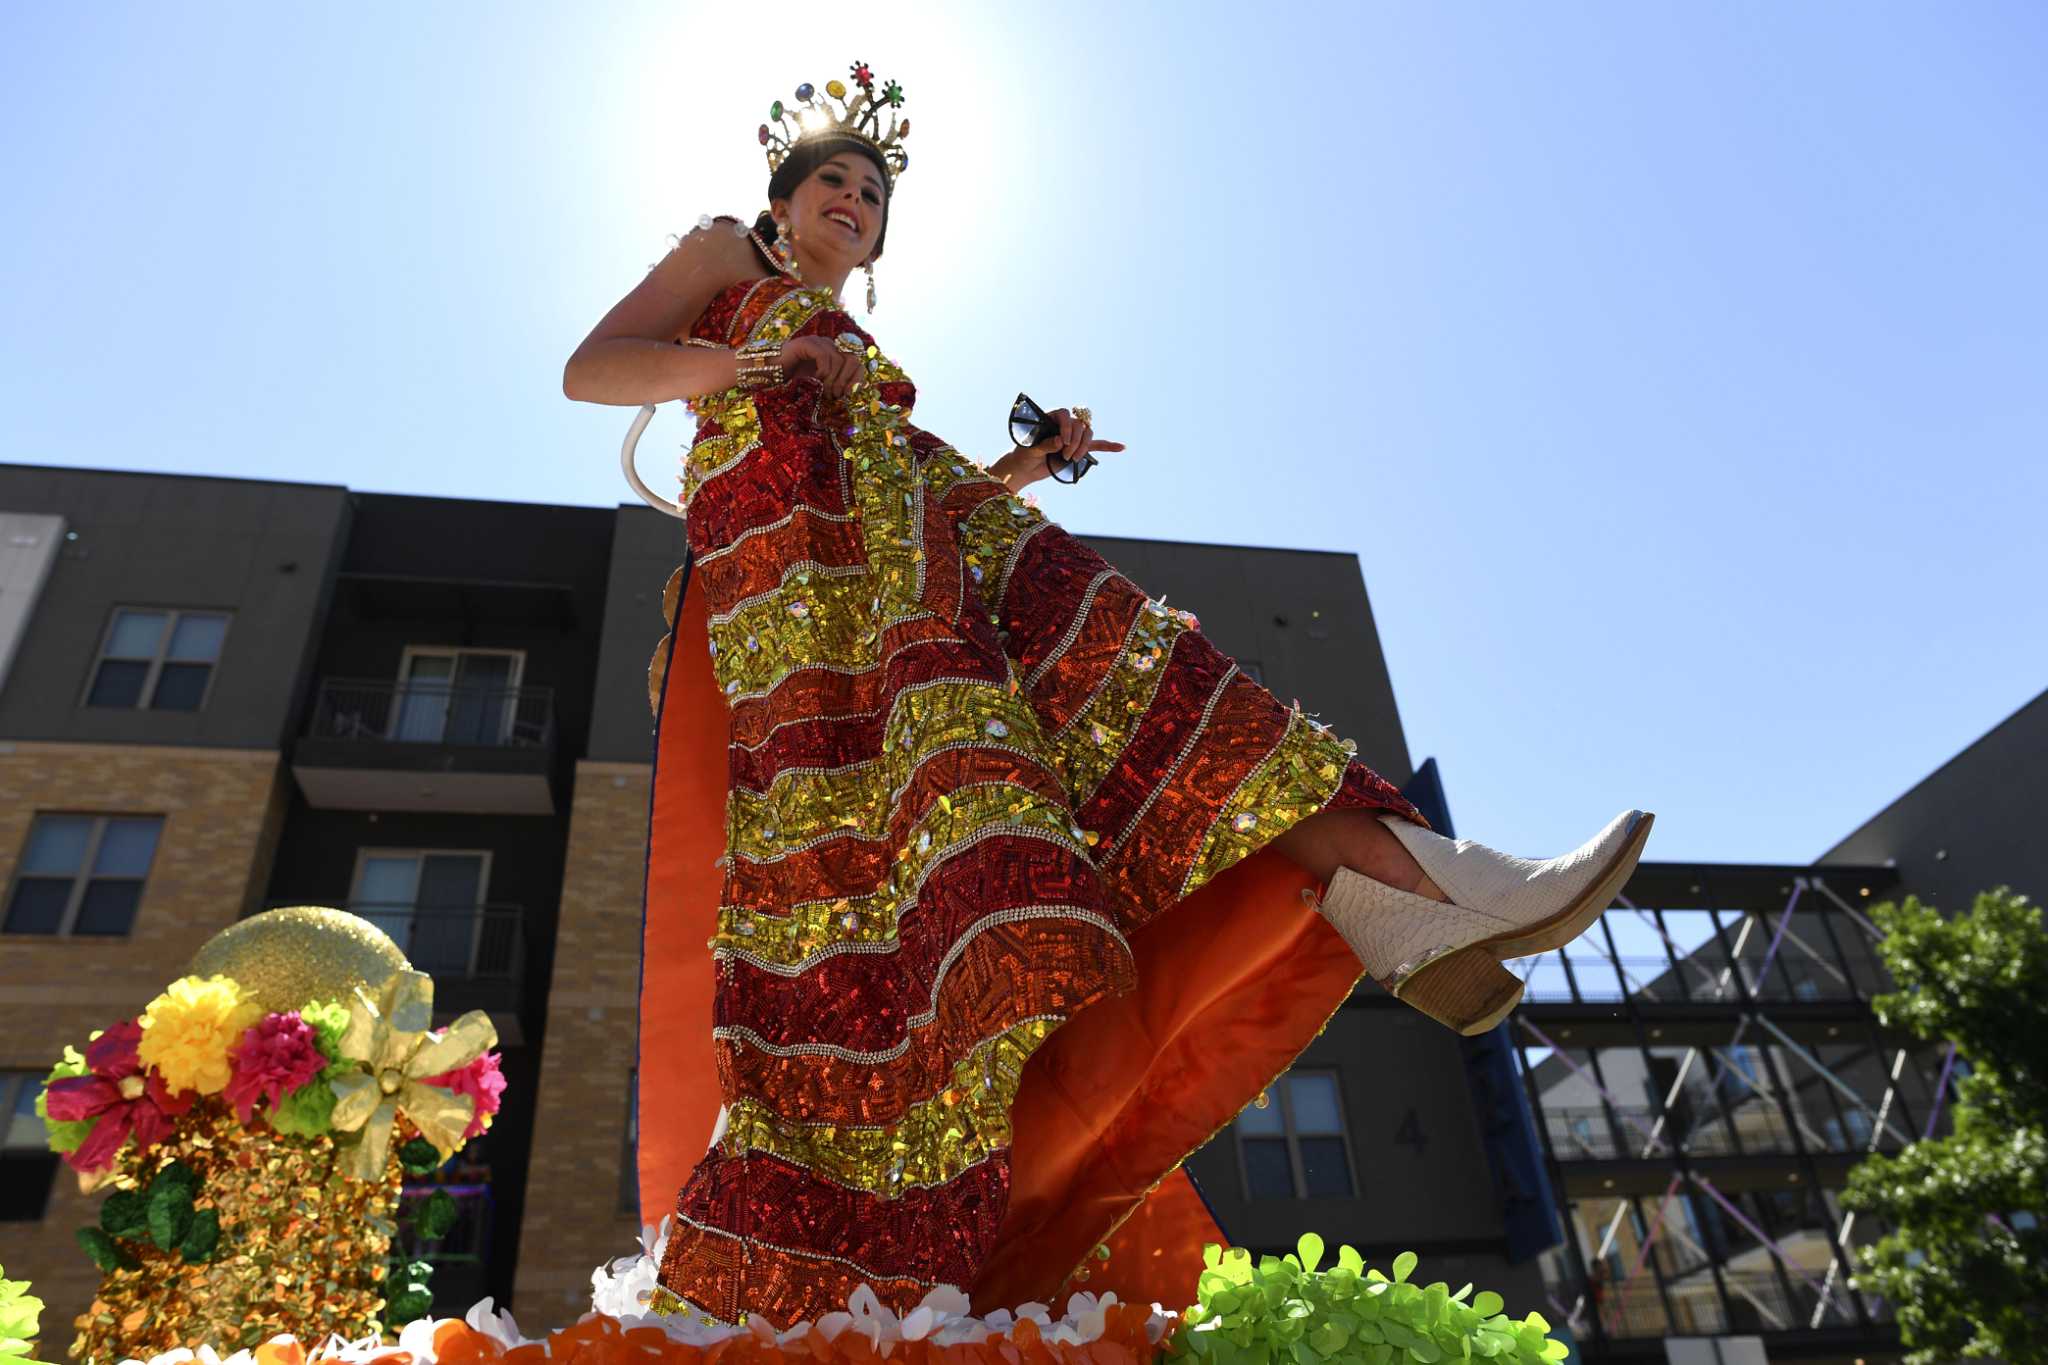 San Antonio's Battle of Flowers Parade tickets on sale now after 2year